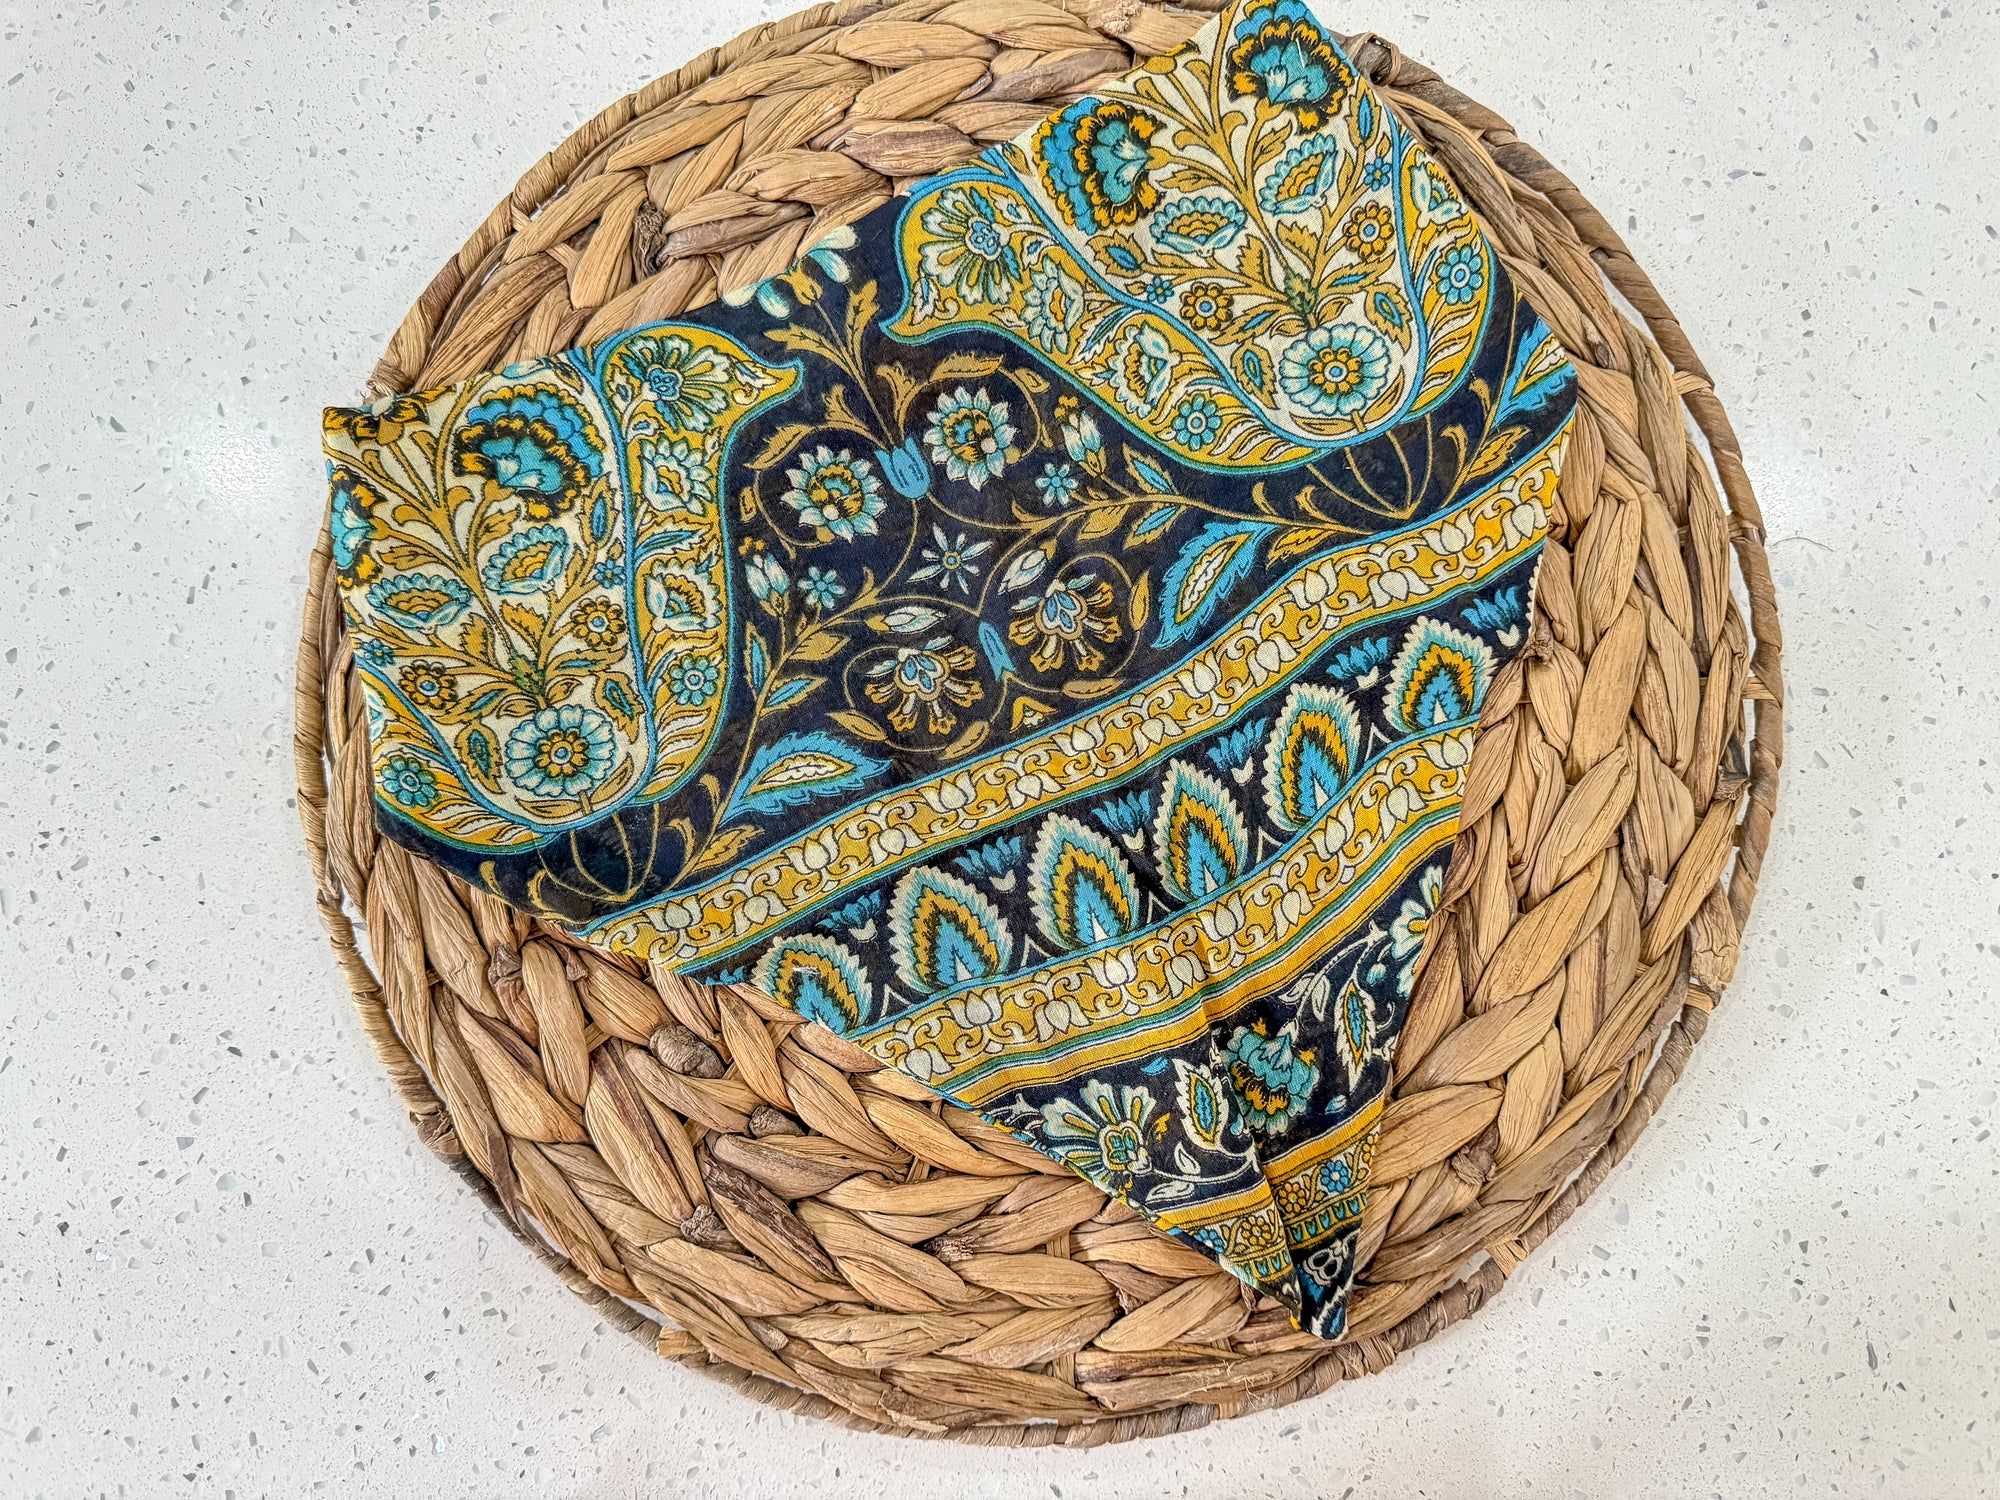 a woven basket with a blue and yellow paisley design